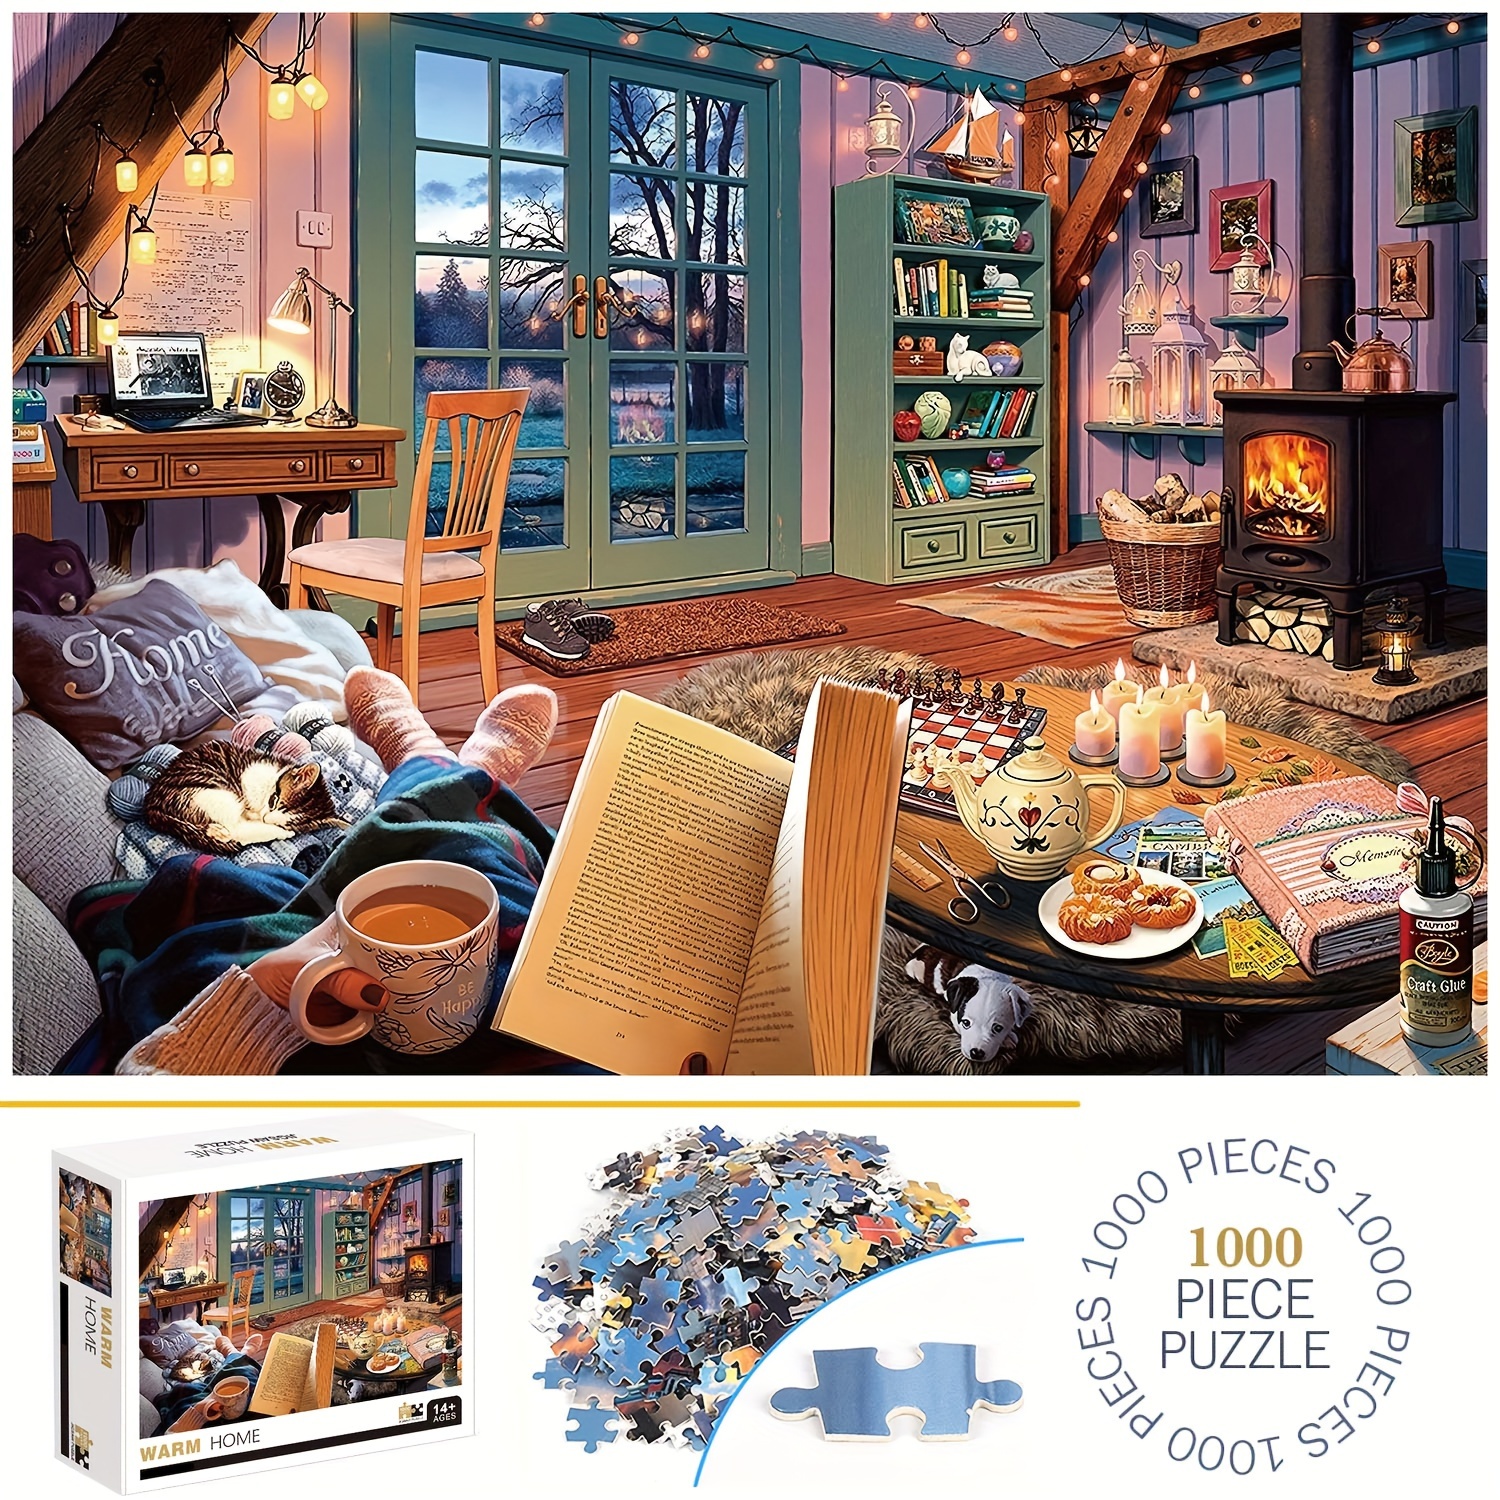 

1000-piece Premium Quality - Thick, Durable & Seamless | Ideal For Adults & Family Game Night | Perfect Gift For Holidays & Special Occasions